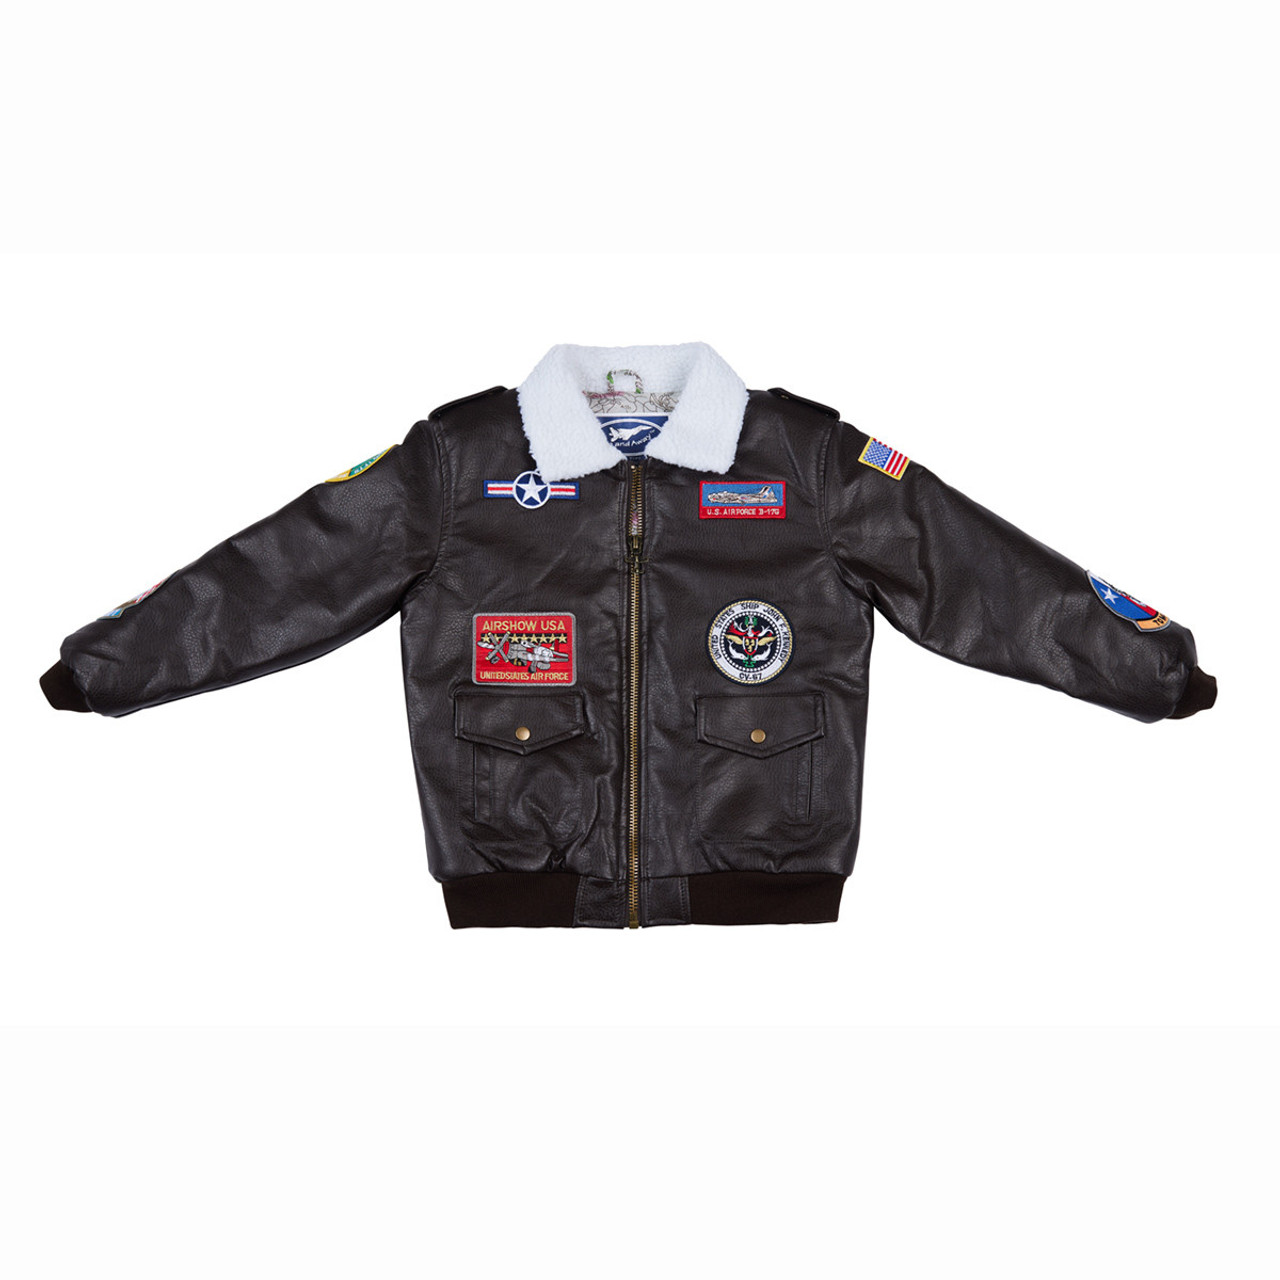 toys r us, Jackets & Coats, Toys R Us 9s Bomber Flight Jacket Black  Orange Embroidered R Safety With Flames